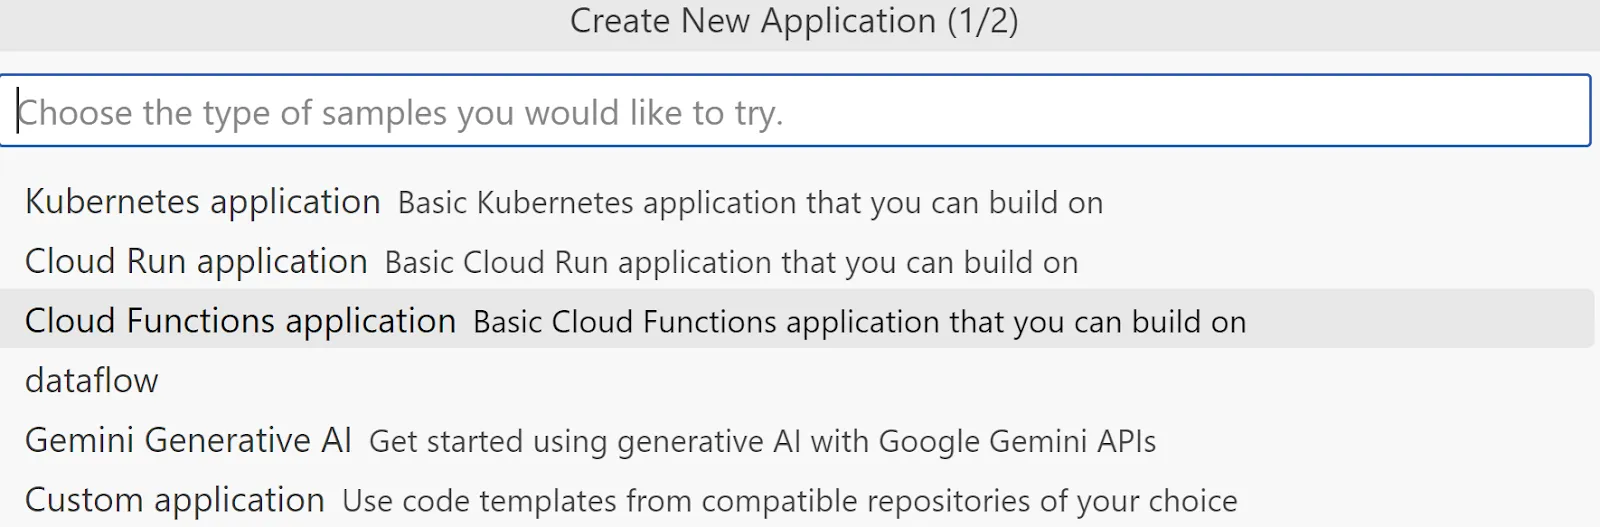 Create New Application pop up page 1